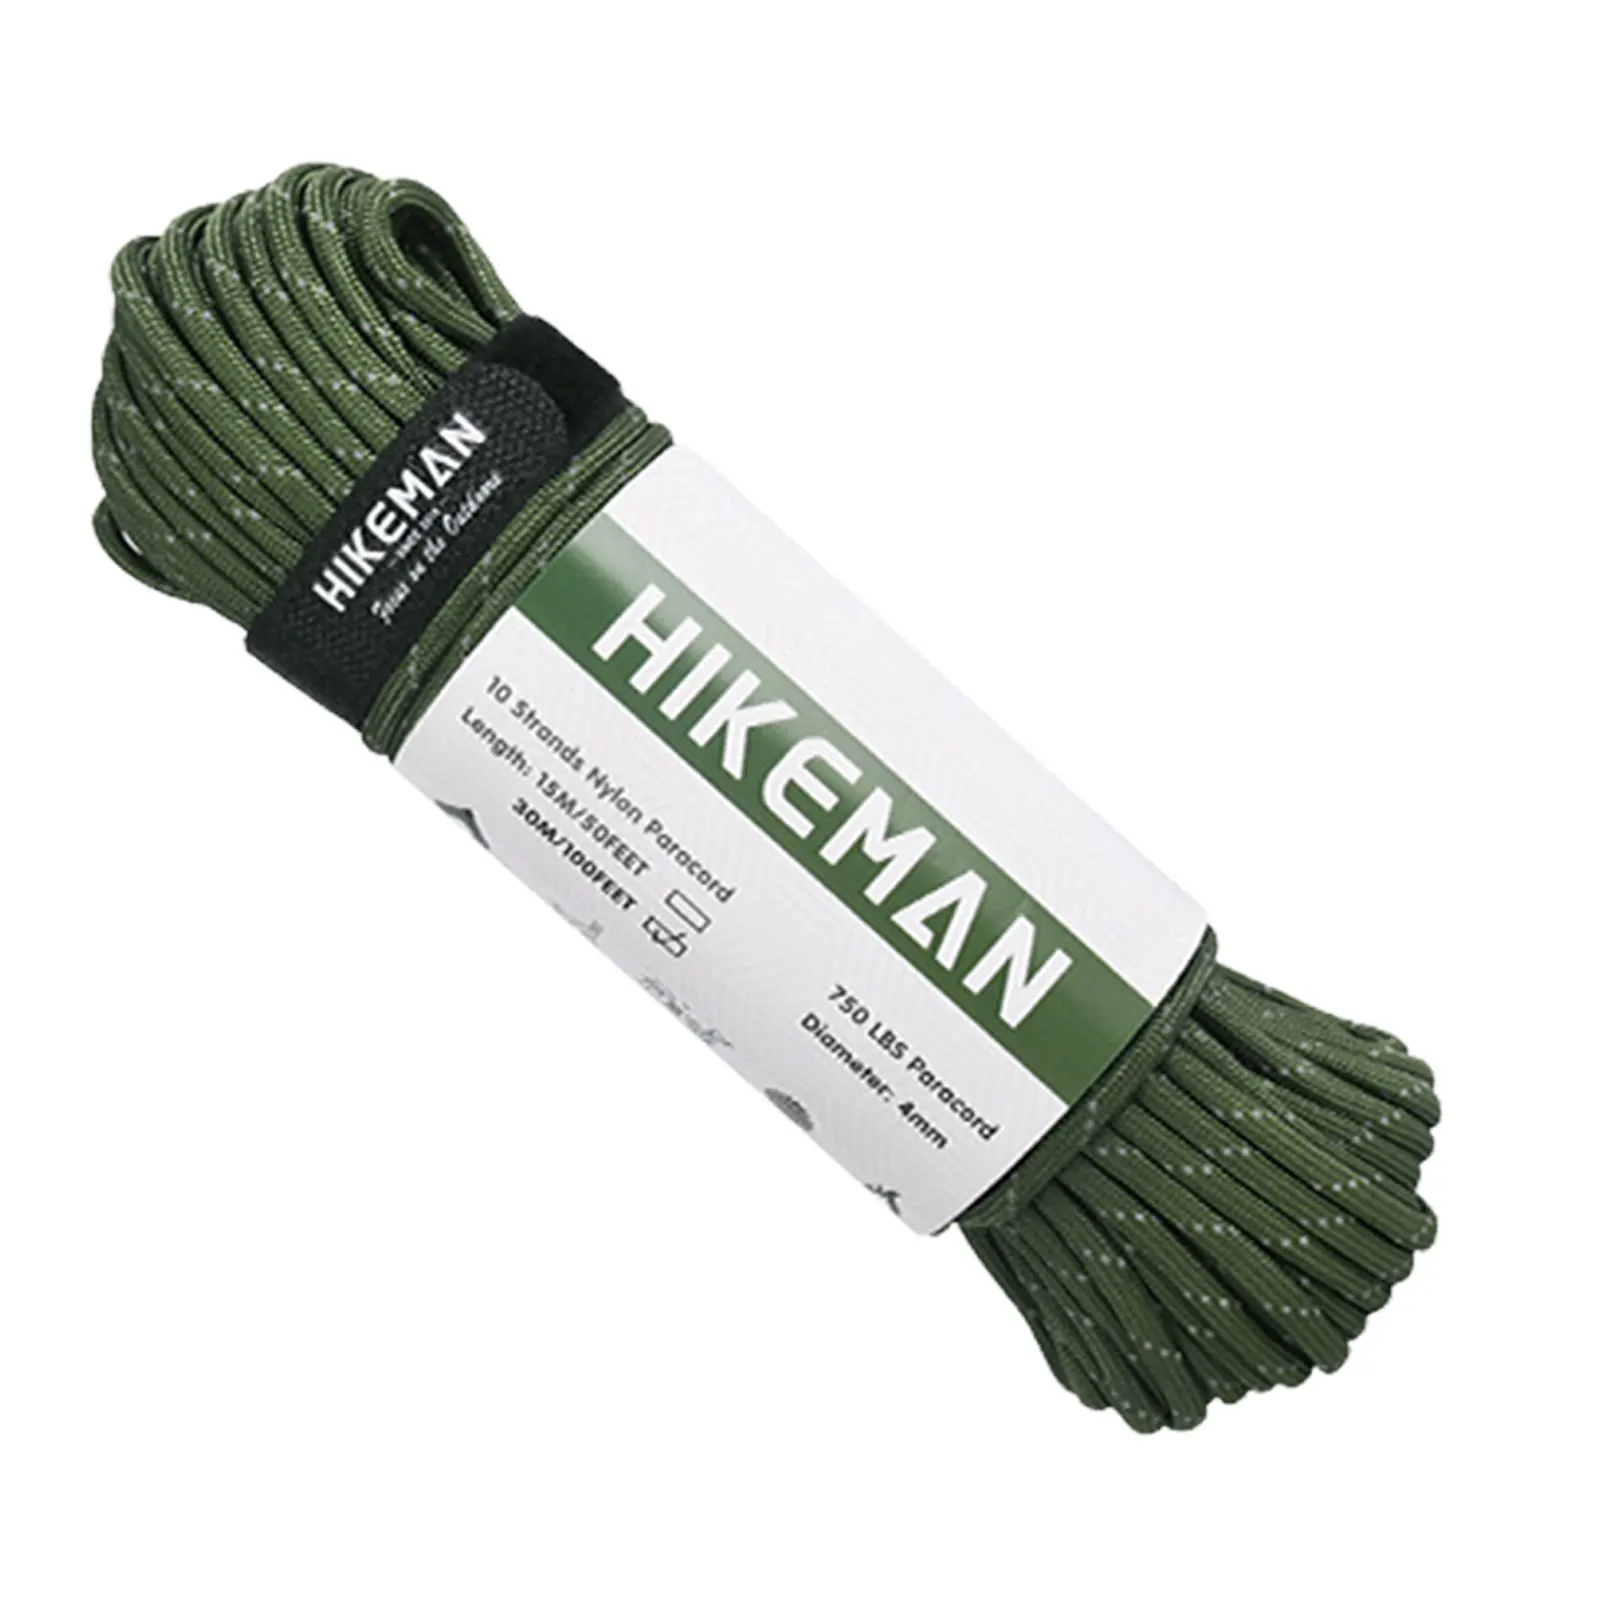 

Tacticals Paracord Reflective Parachute Nylon Cord 415KG 10-Strand Multifunction Survival Parachute Cord For Making Paracord